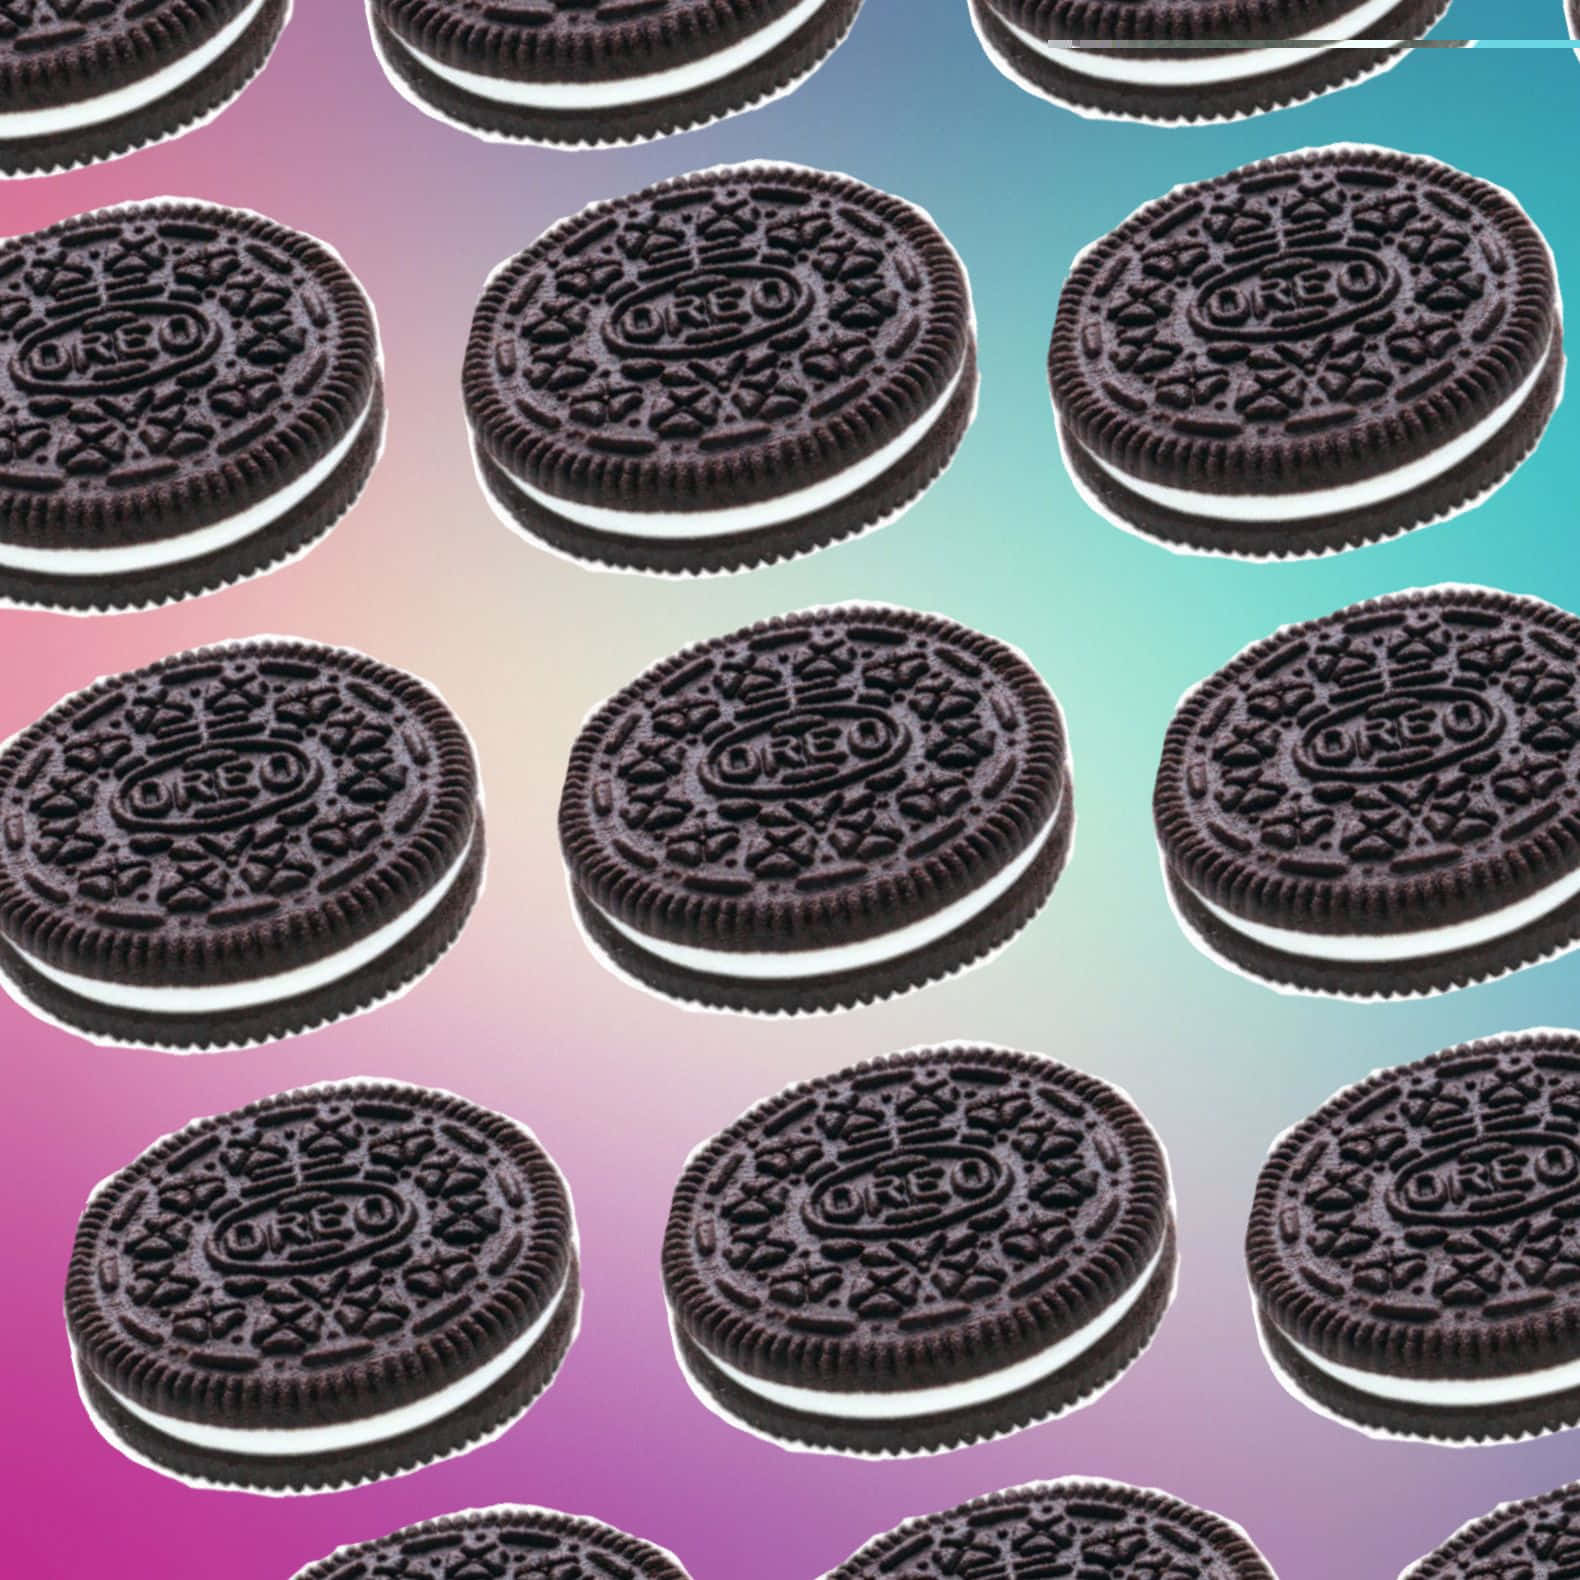 Download Oreo Cookie 1580 X 1580 Wallpaper